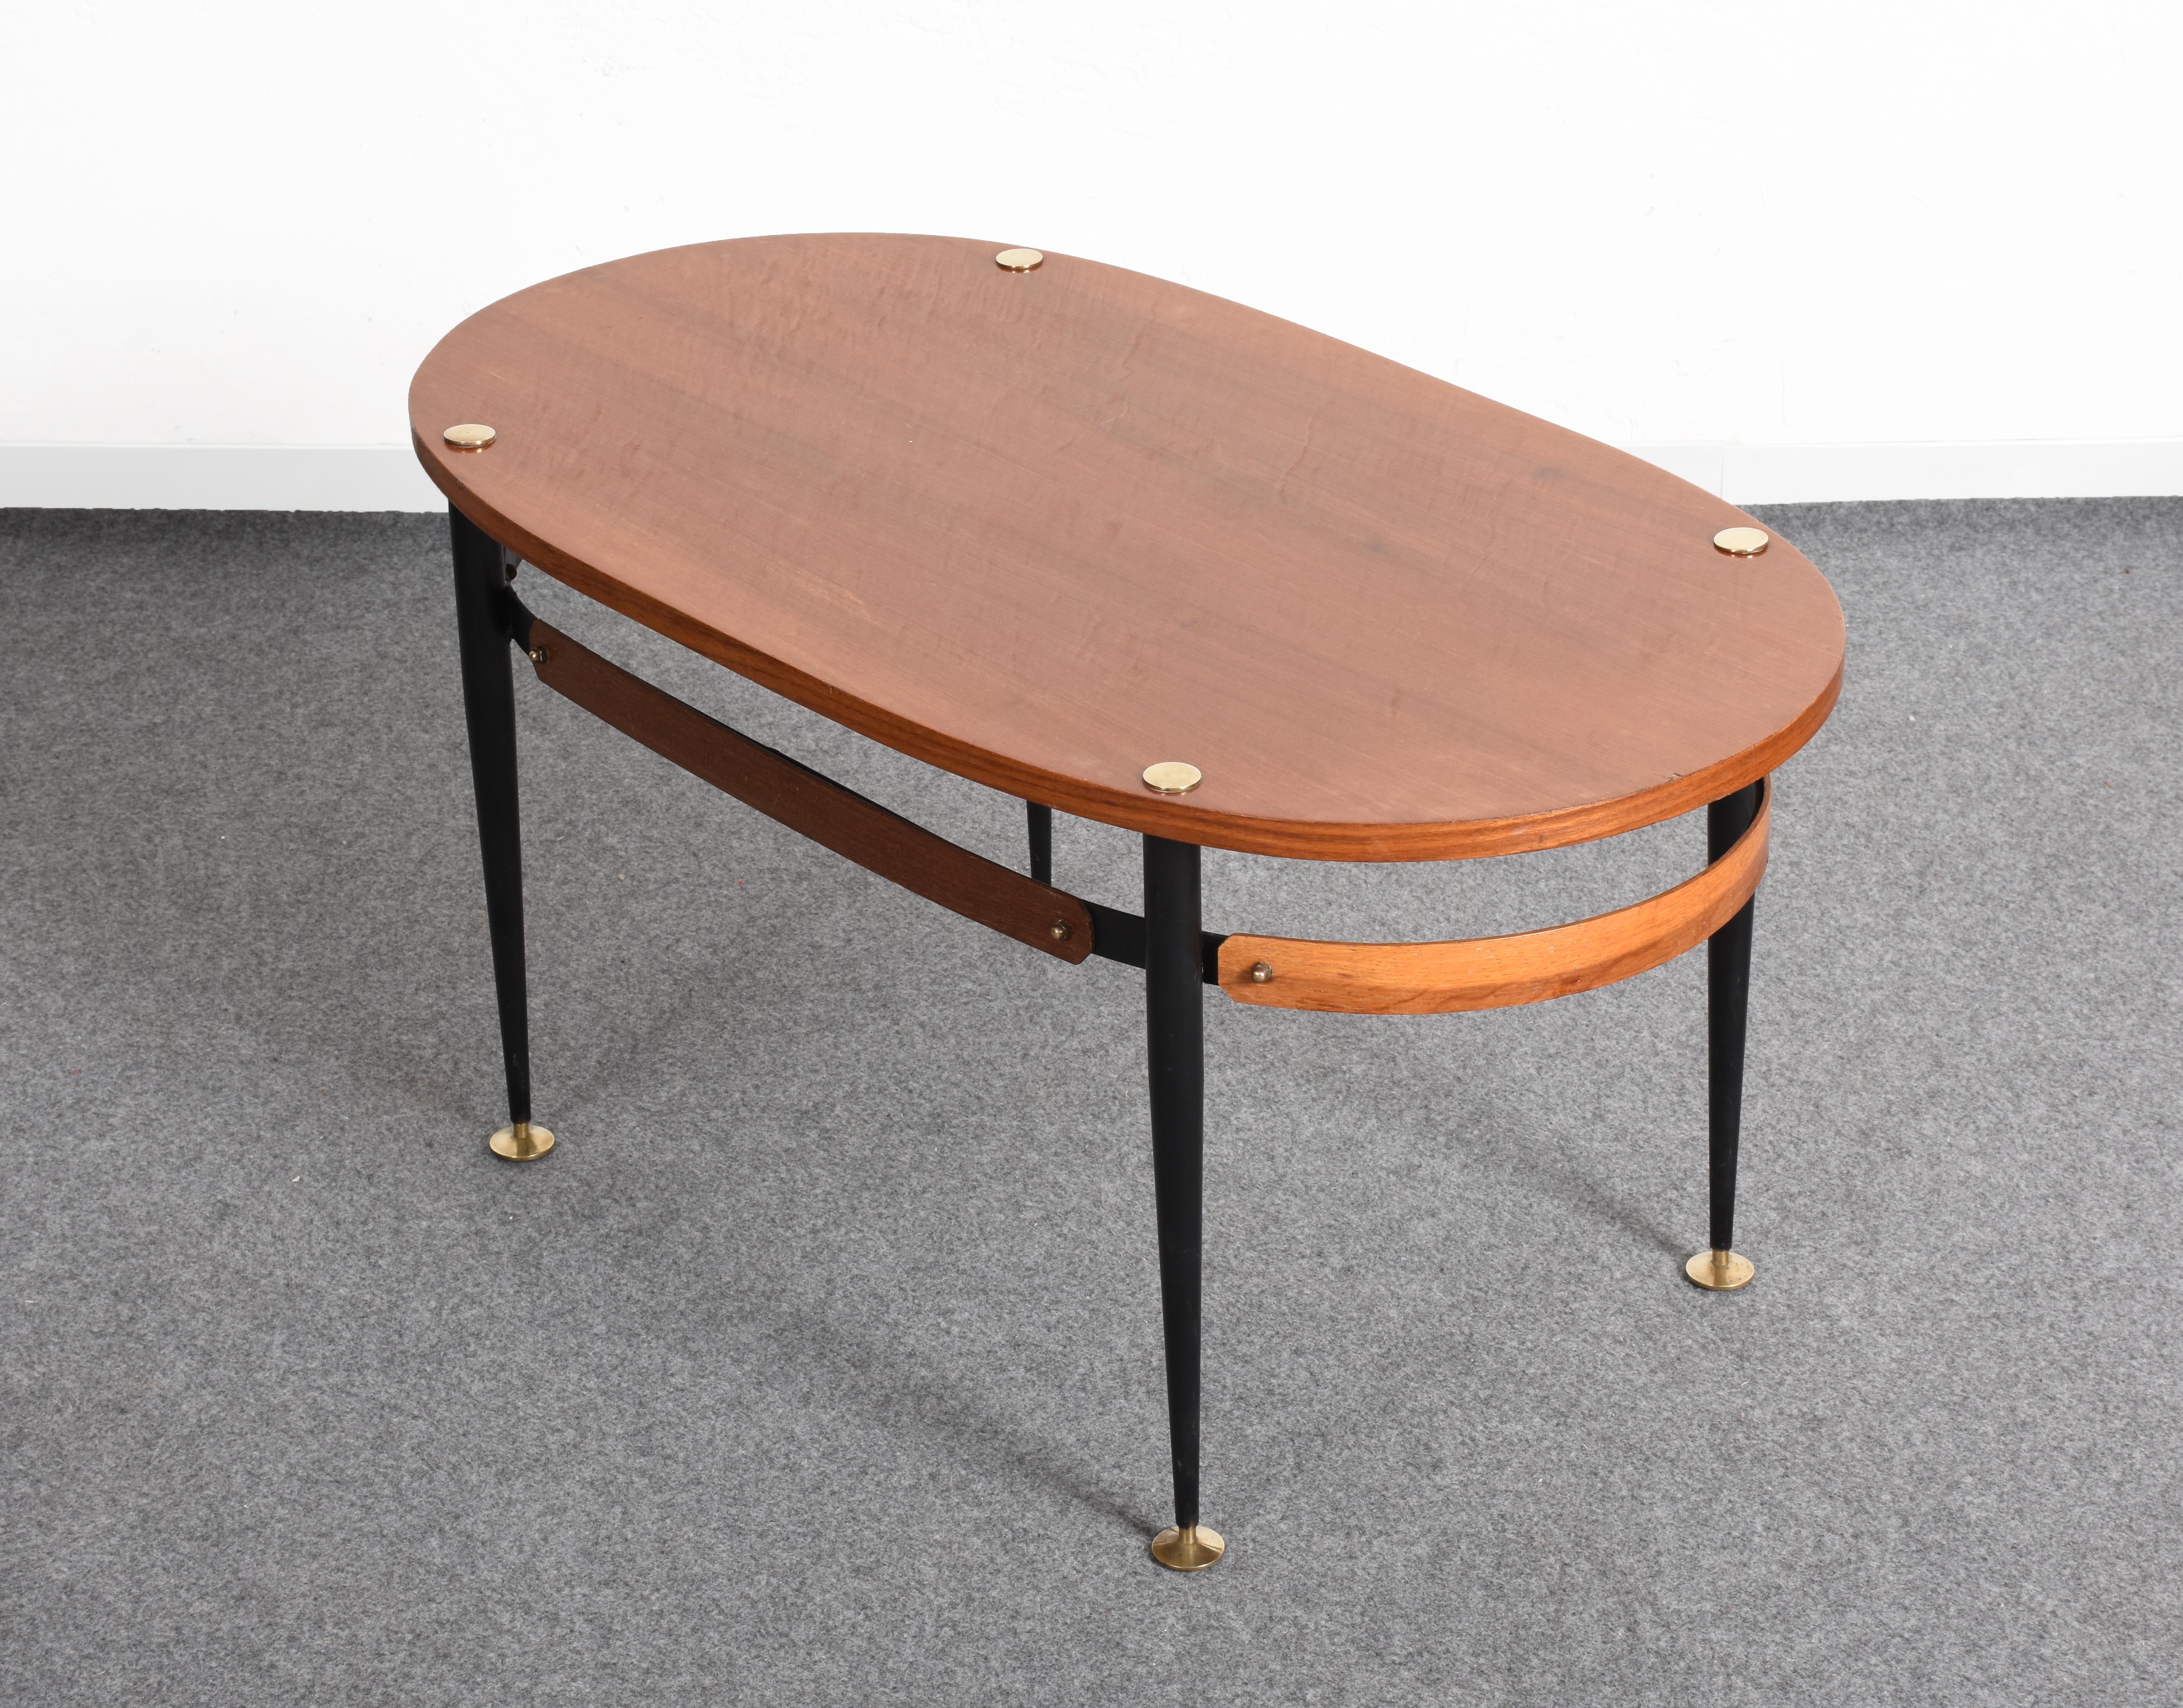 Beautiful Italian midcentury coffee table from the 1950s by Silvio Cavatorta.

It has a very elegant oval-shaped top mounted on painted iron legs. The feet and supports of the top are in solid brass. The lower band in Italian teak is astonishing